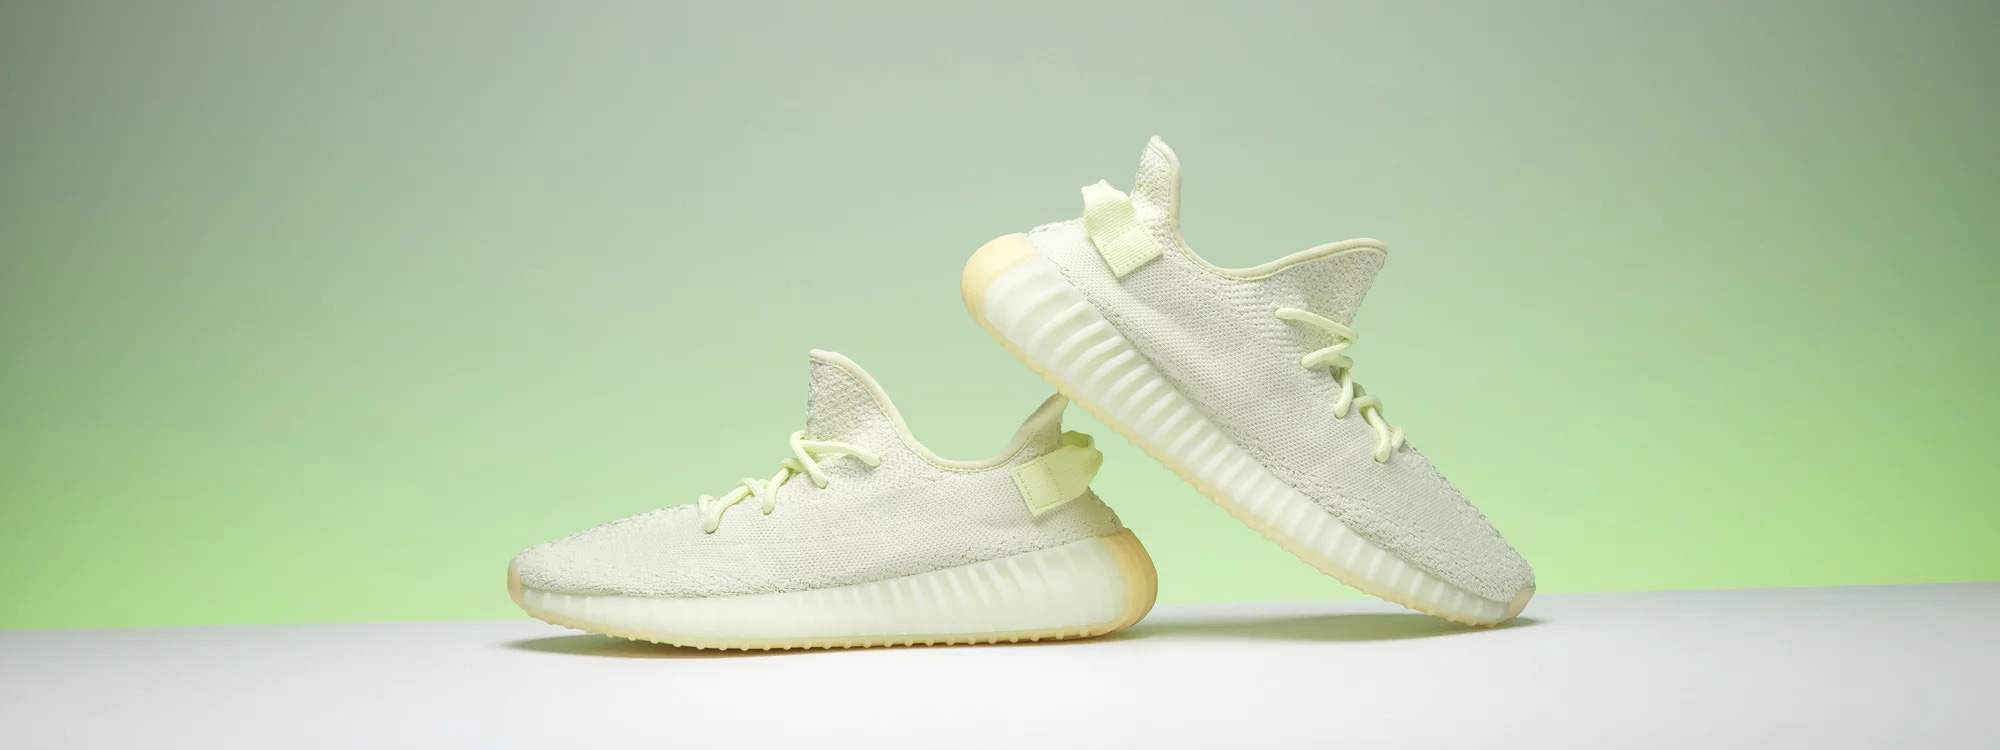 For sale Your size Adidas Yeezy Boost 350 V2 Butter shoes